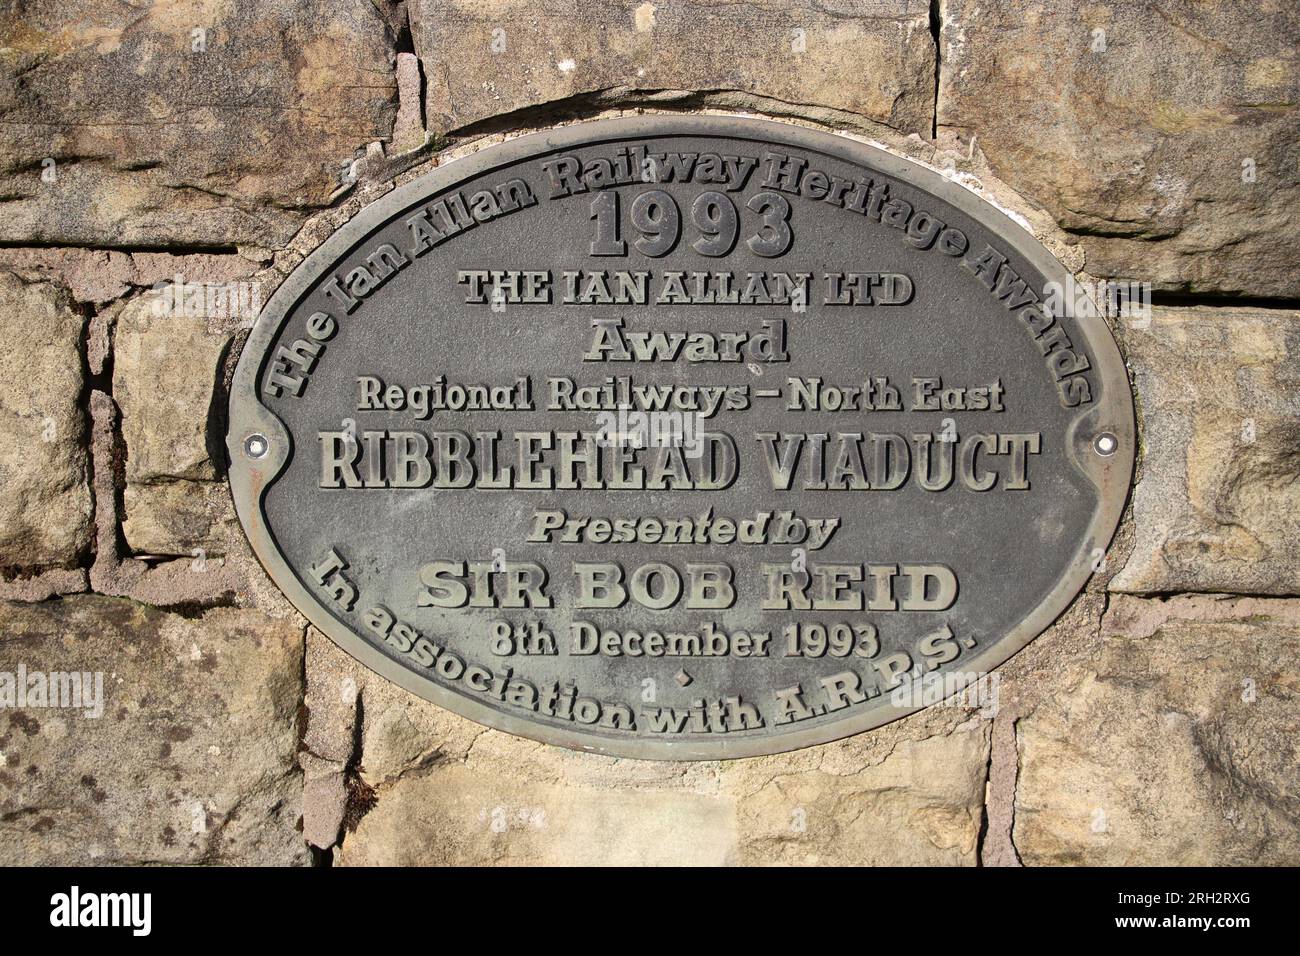 Oval plaque dated 1993 for Ian Allan Railway Heritage Award to Regional Railways (North East) for work on Ribblehead Viaduct. Stock Photo